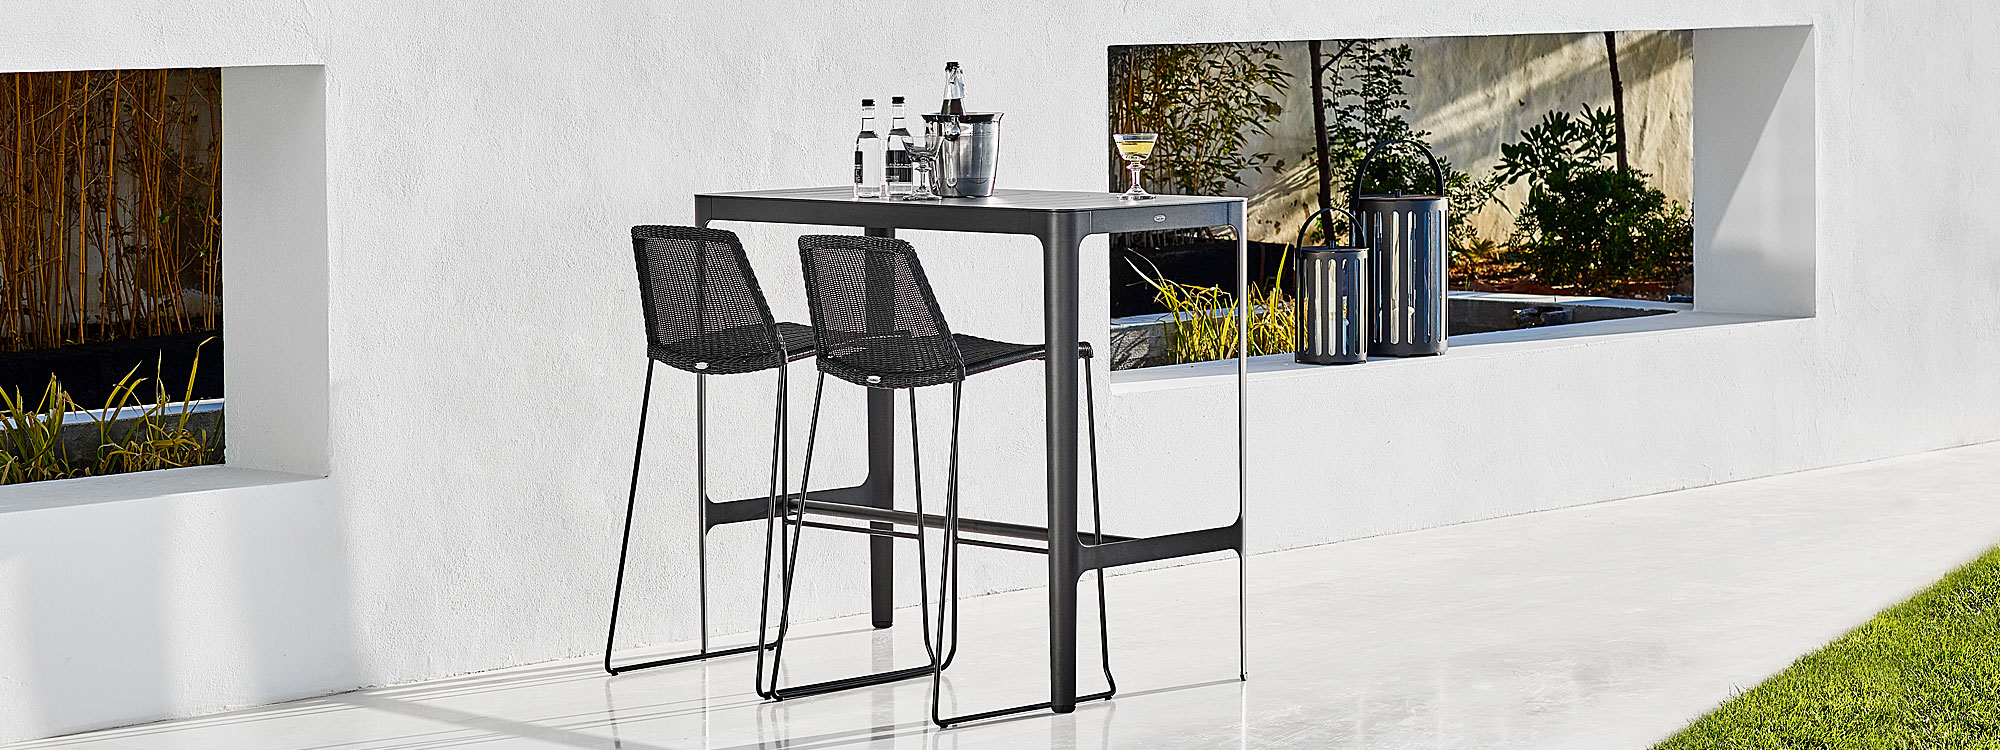 Cut bar table & Breeze modern bar stool is a contemporary outdoor bar chair in luxury quality garden furniture materials by Cane-Line modern garden furniture company